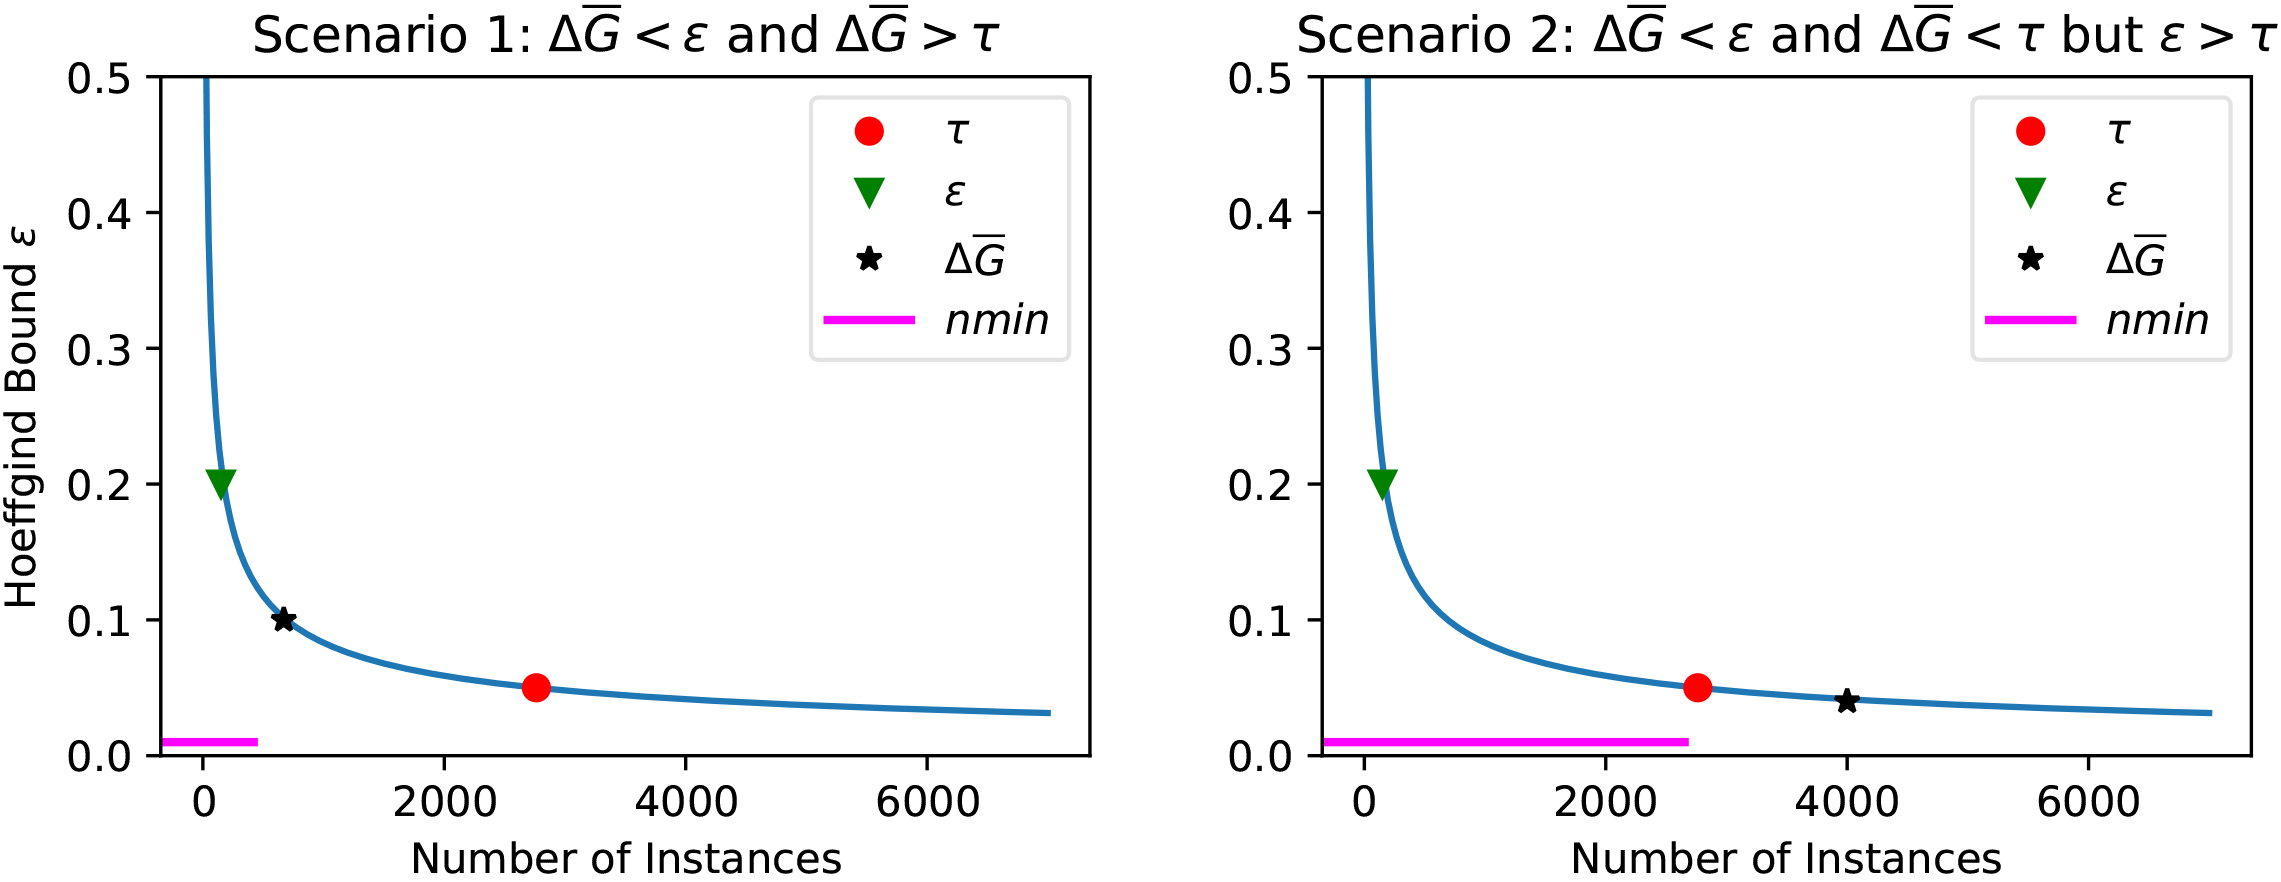 Example of the nmin adaptation method. The value of nmin is going to be adapted based on two scenarios: scenario 1 (left plot), and scenario 2 (right plot).